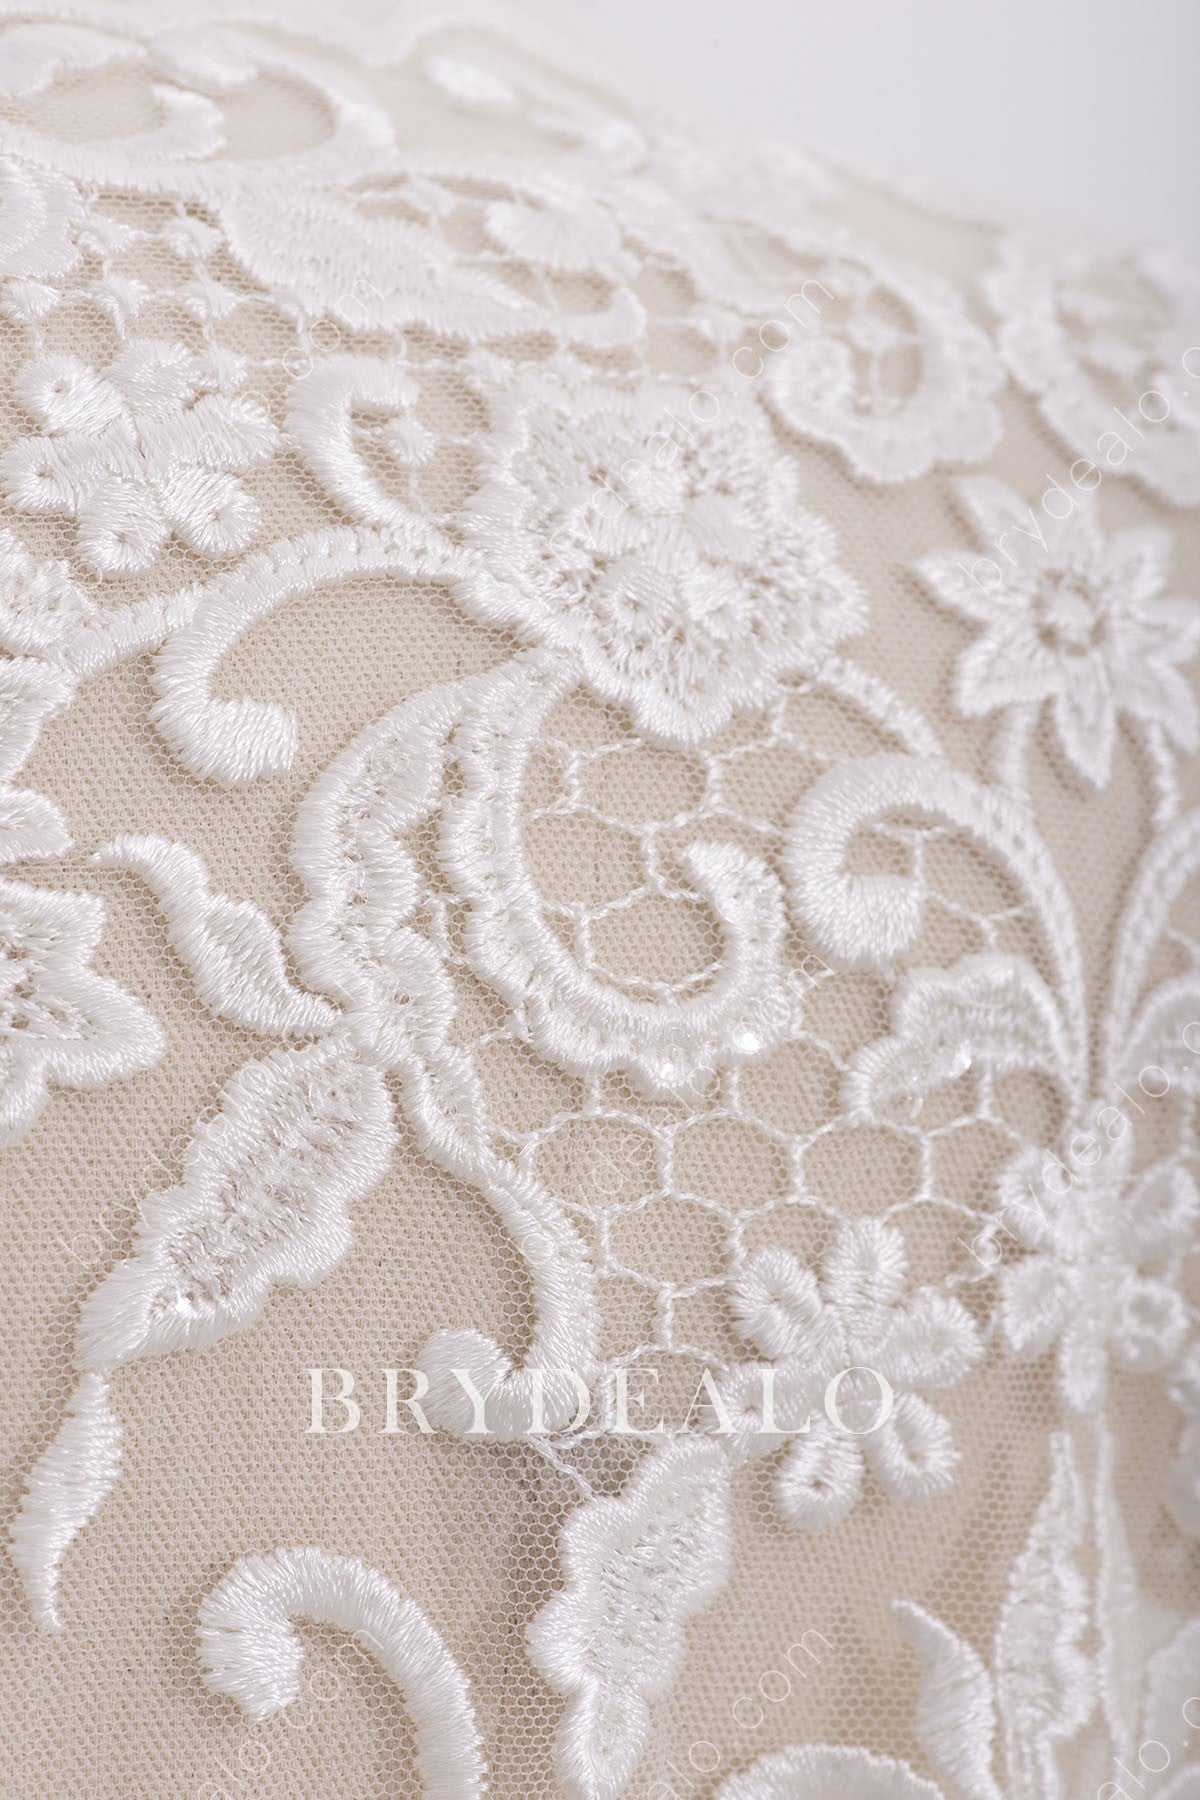 Flower Cording Bridal Lace Fabric